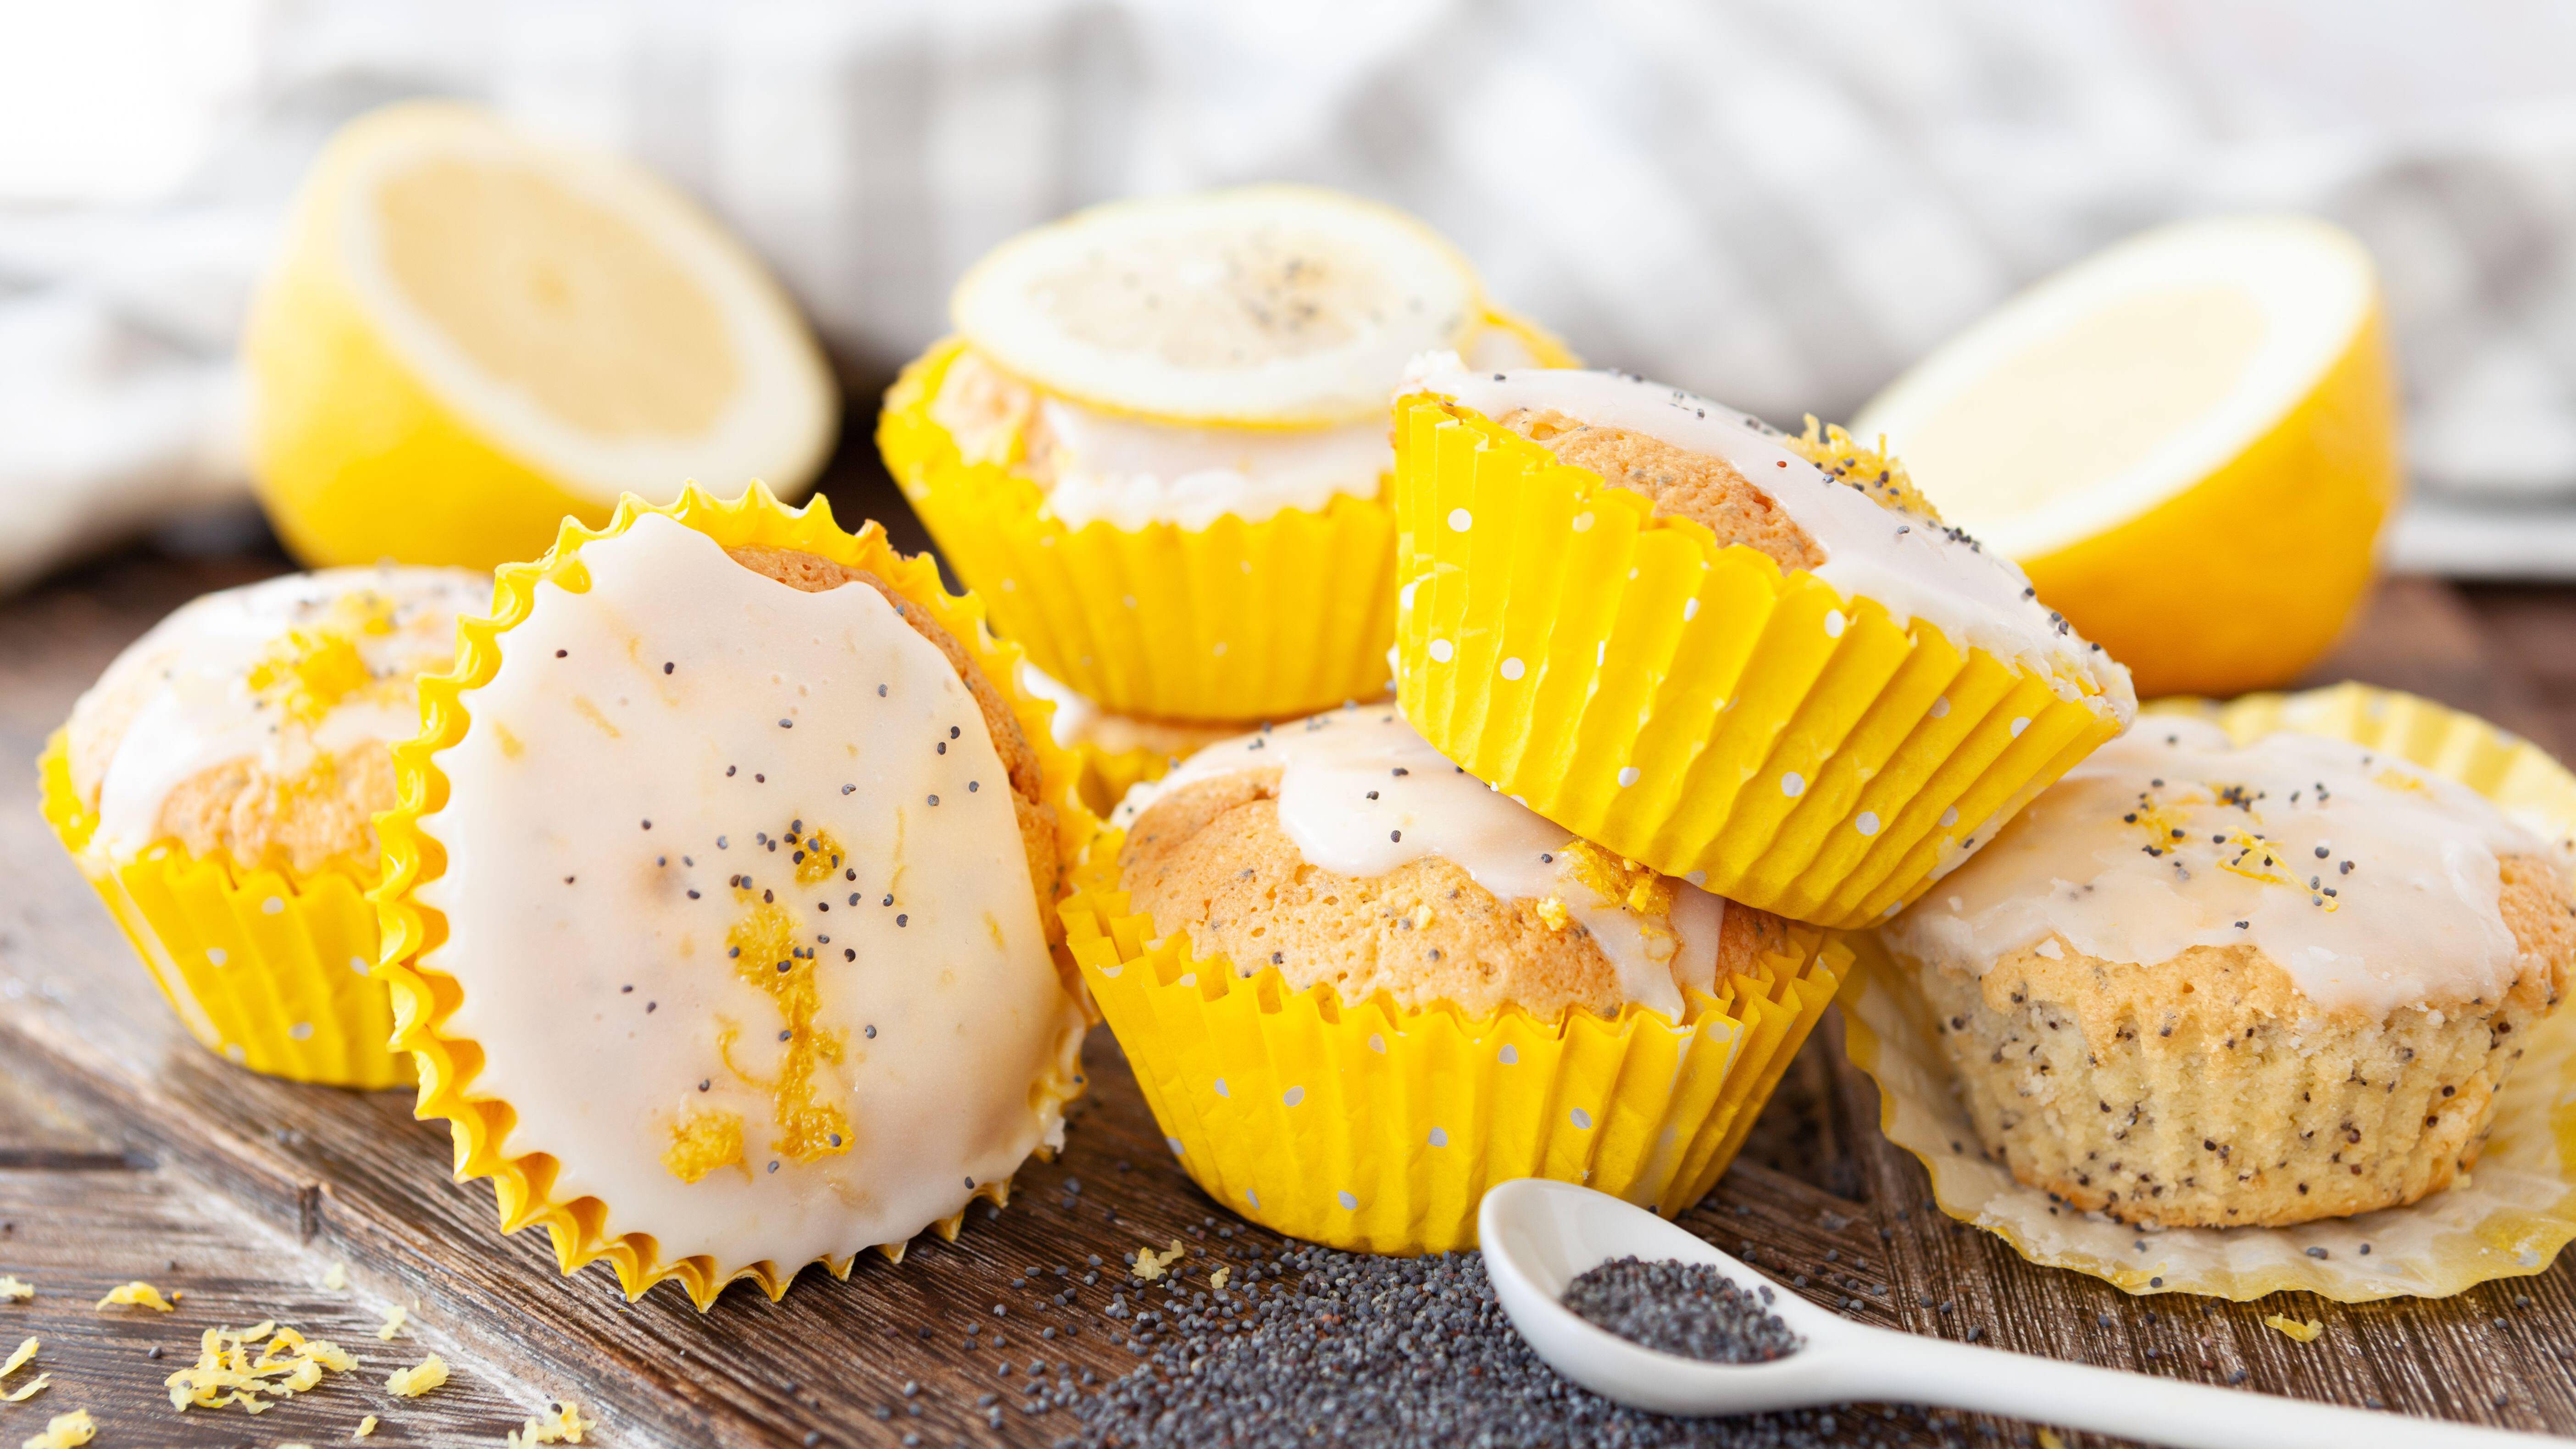 Lemon poppy seed cupcakes Baking Recipes GoodTo picture pic